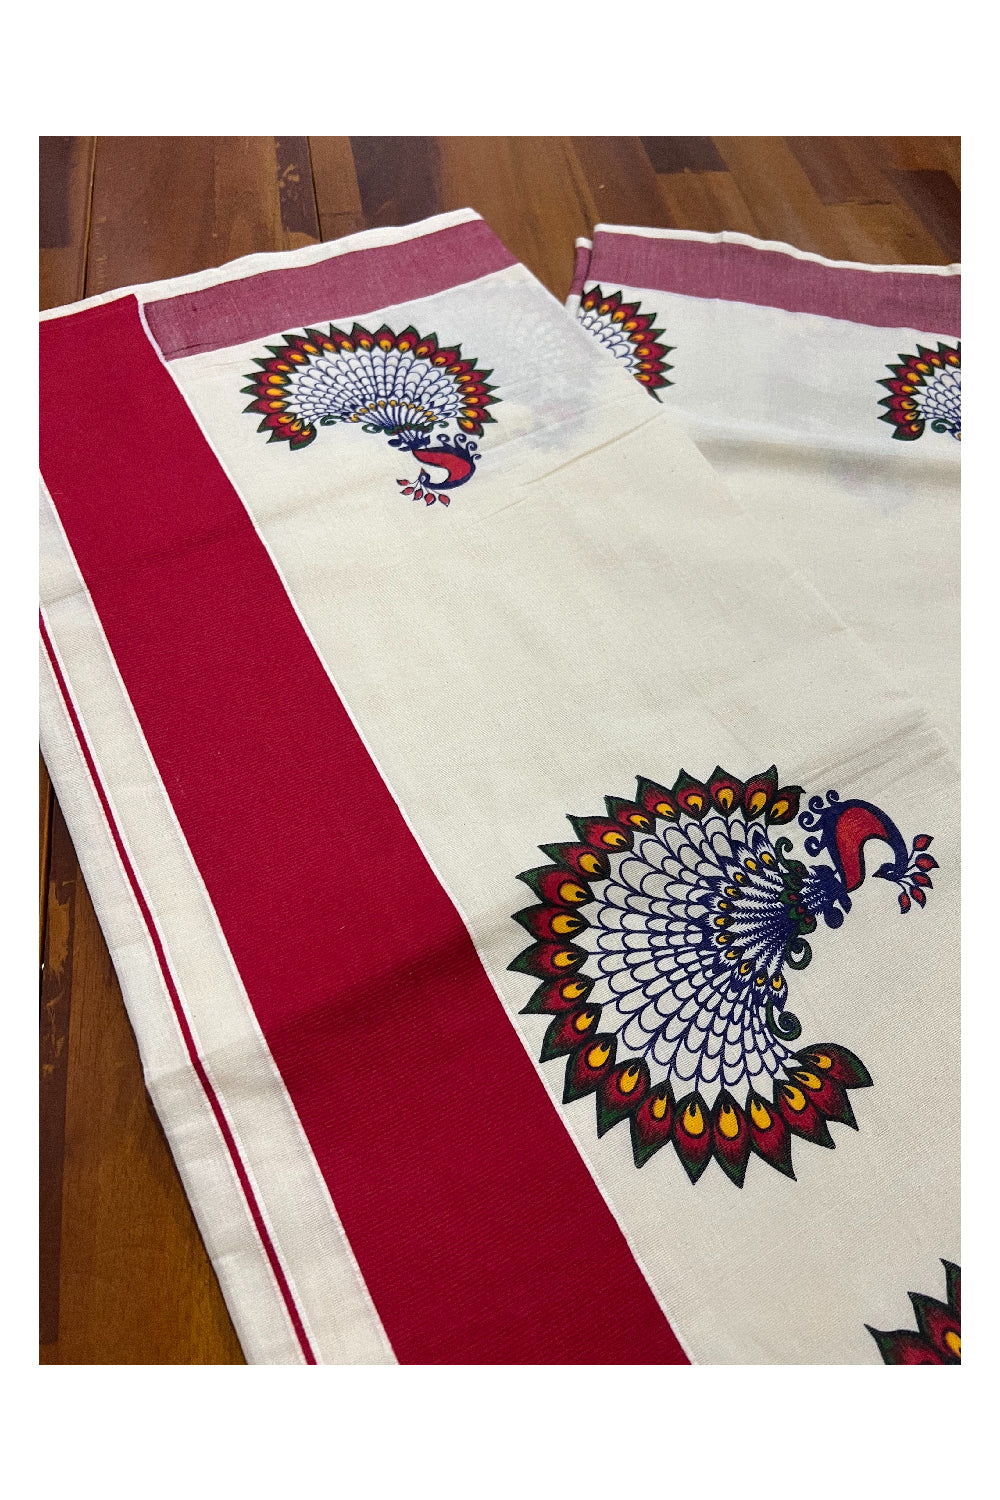 Kerala Pure Cotton Saree with Mural Printed Peacock Design and Dark Red Border